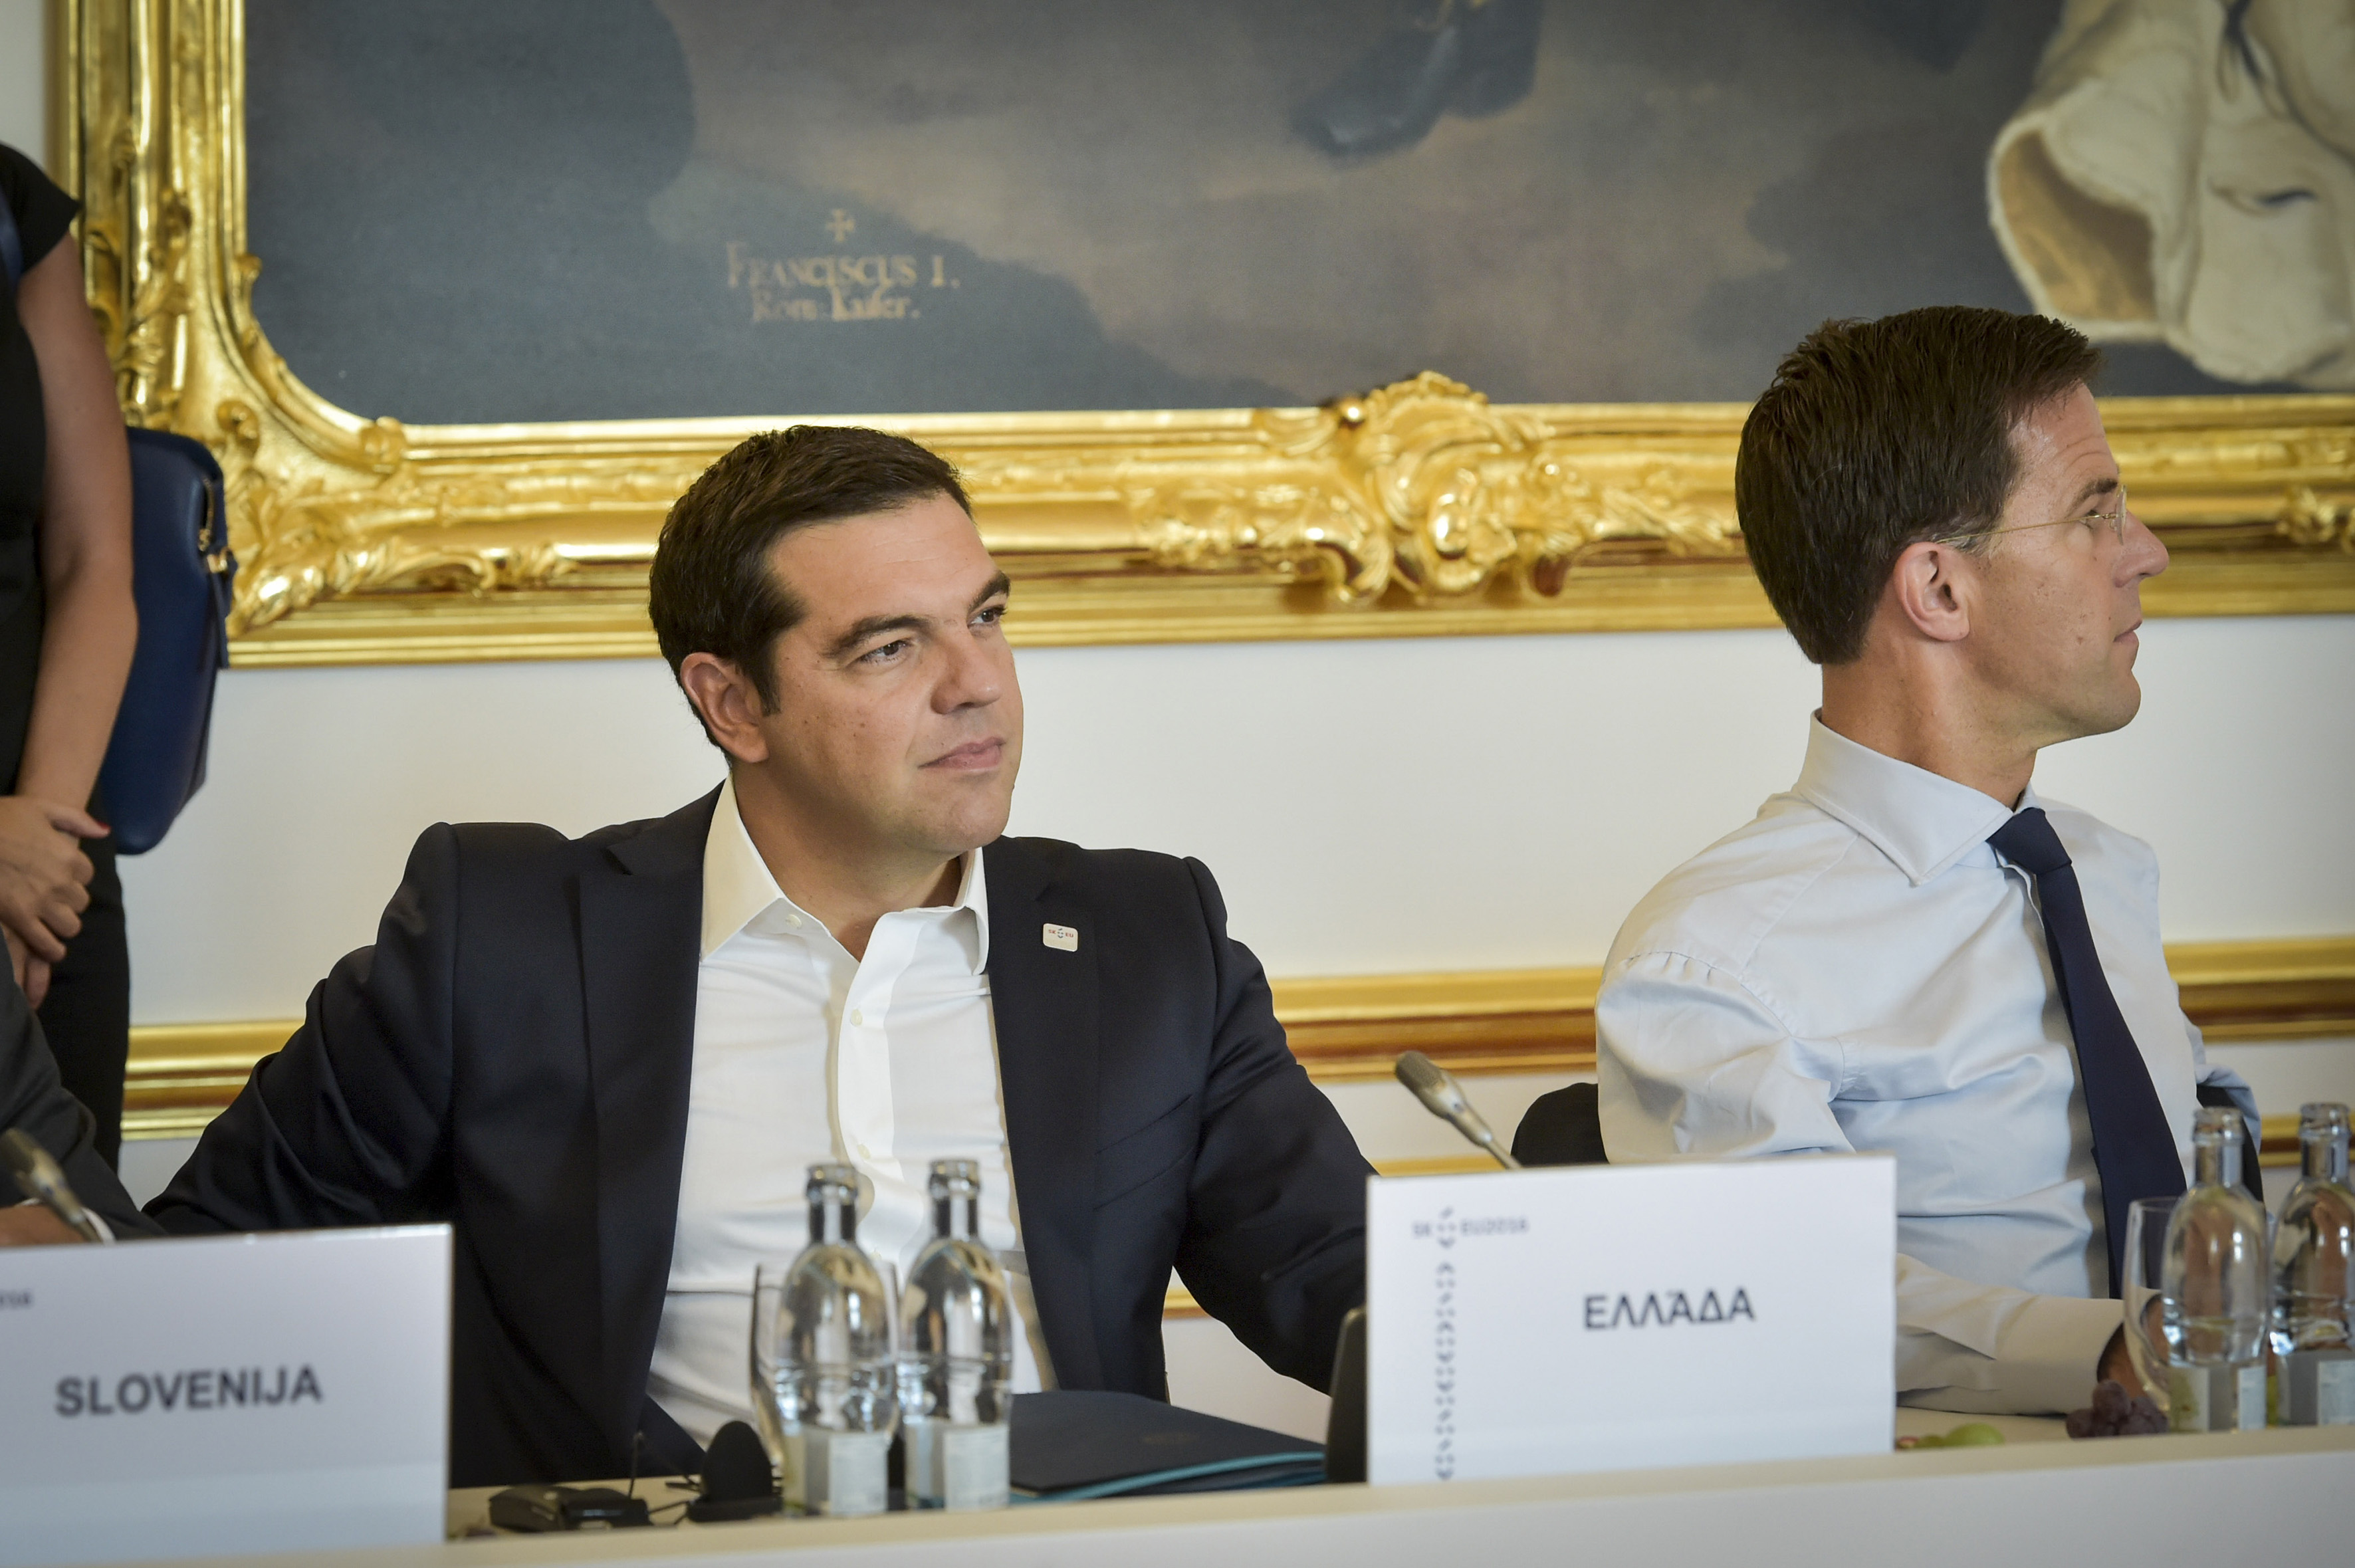 PM Tsipras: “Europe needs a new vision and an agenda for change”